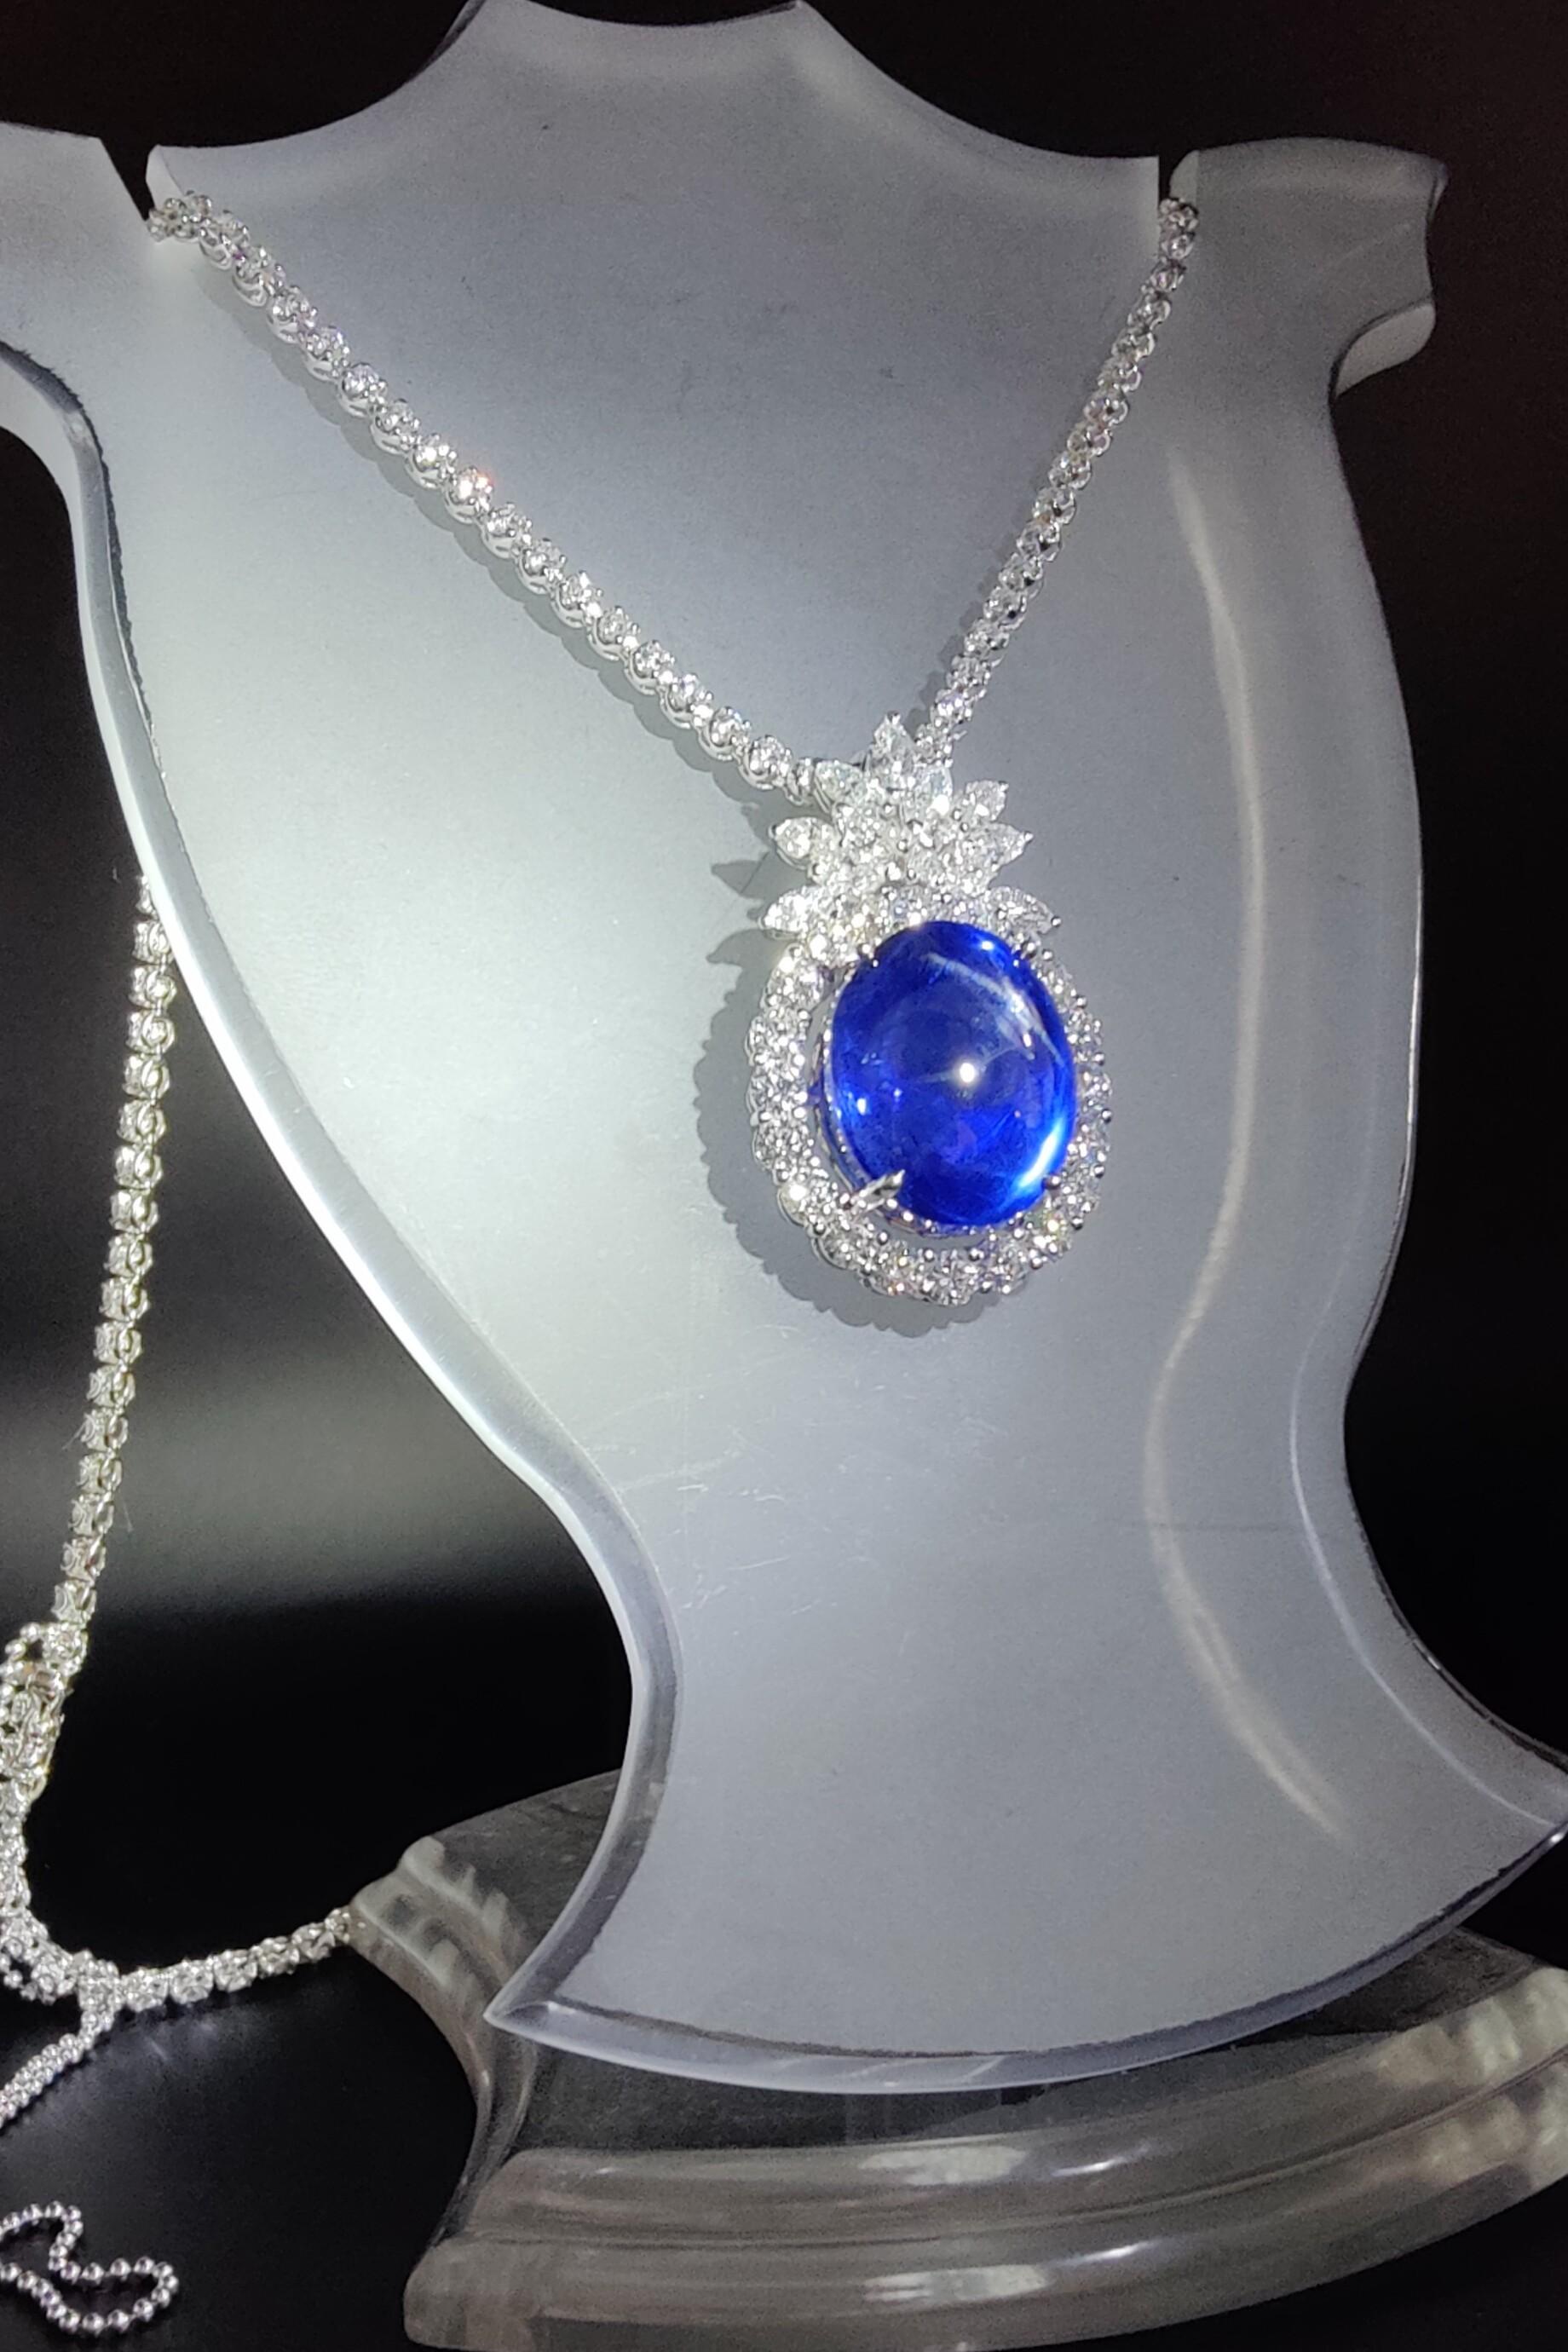 This timeless elegant Blue Star Sapphire Diamond Pendant Necklace will never go out of style!

Transparent with minimal impurities, the stunning centerpiece 26.88-carat oval cabochon cut star sapphire radiates a saturated royal blue color. With the